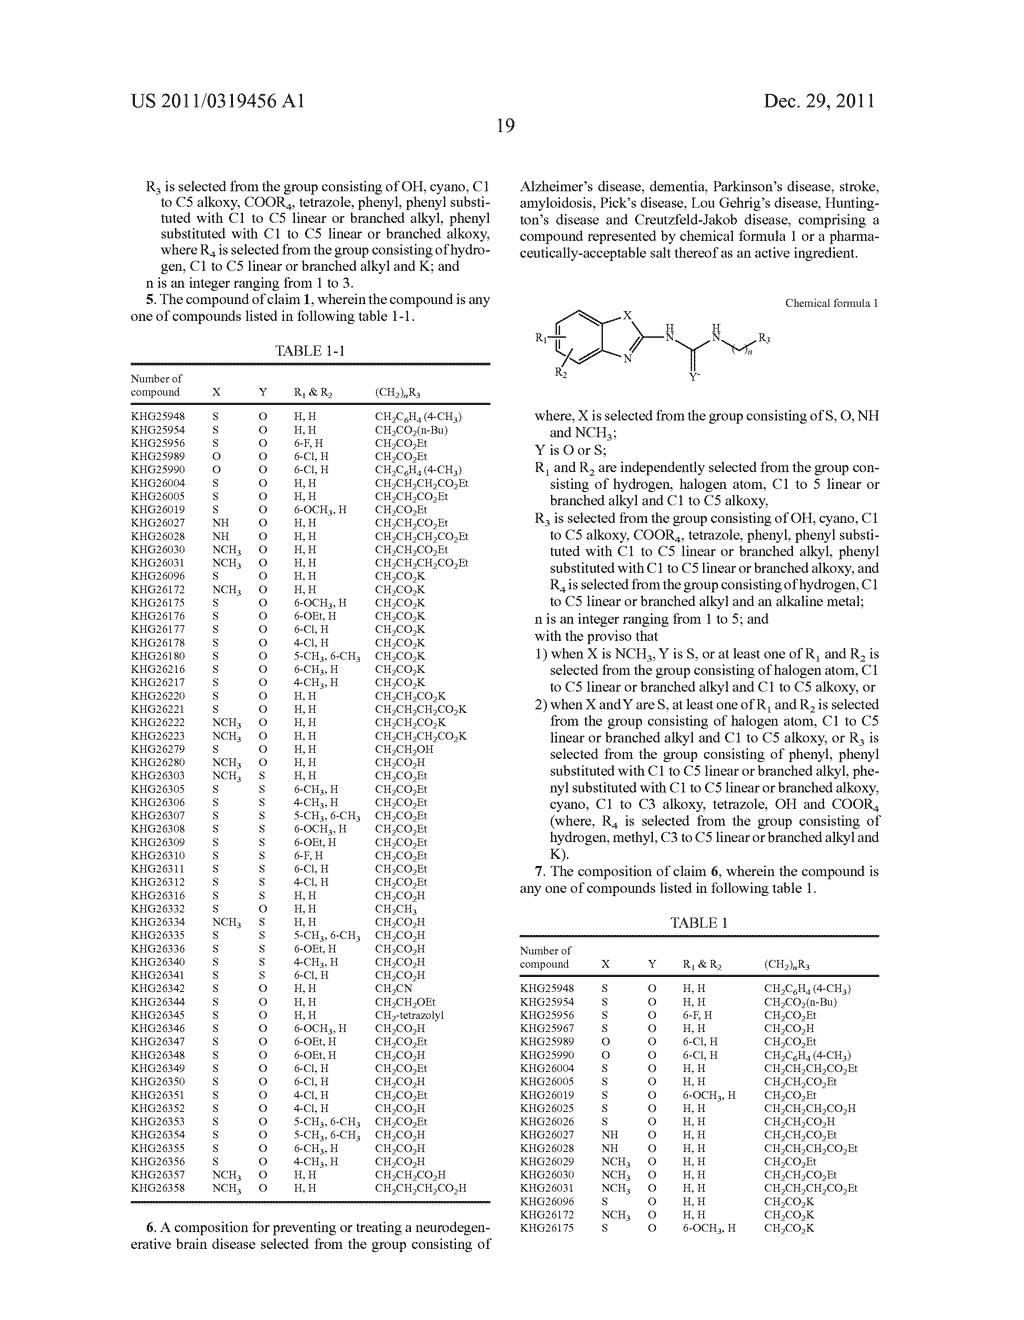 BENZOARYLUREIDO COMPOUNDS, AND COMPOSITION FOR PREVENTION OR TREATMENT OF     NEURODEGENERATIVE BRAIN DISEASE CONTAINING THE SAME - diagram, schematic, and image 26